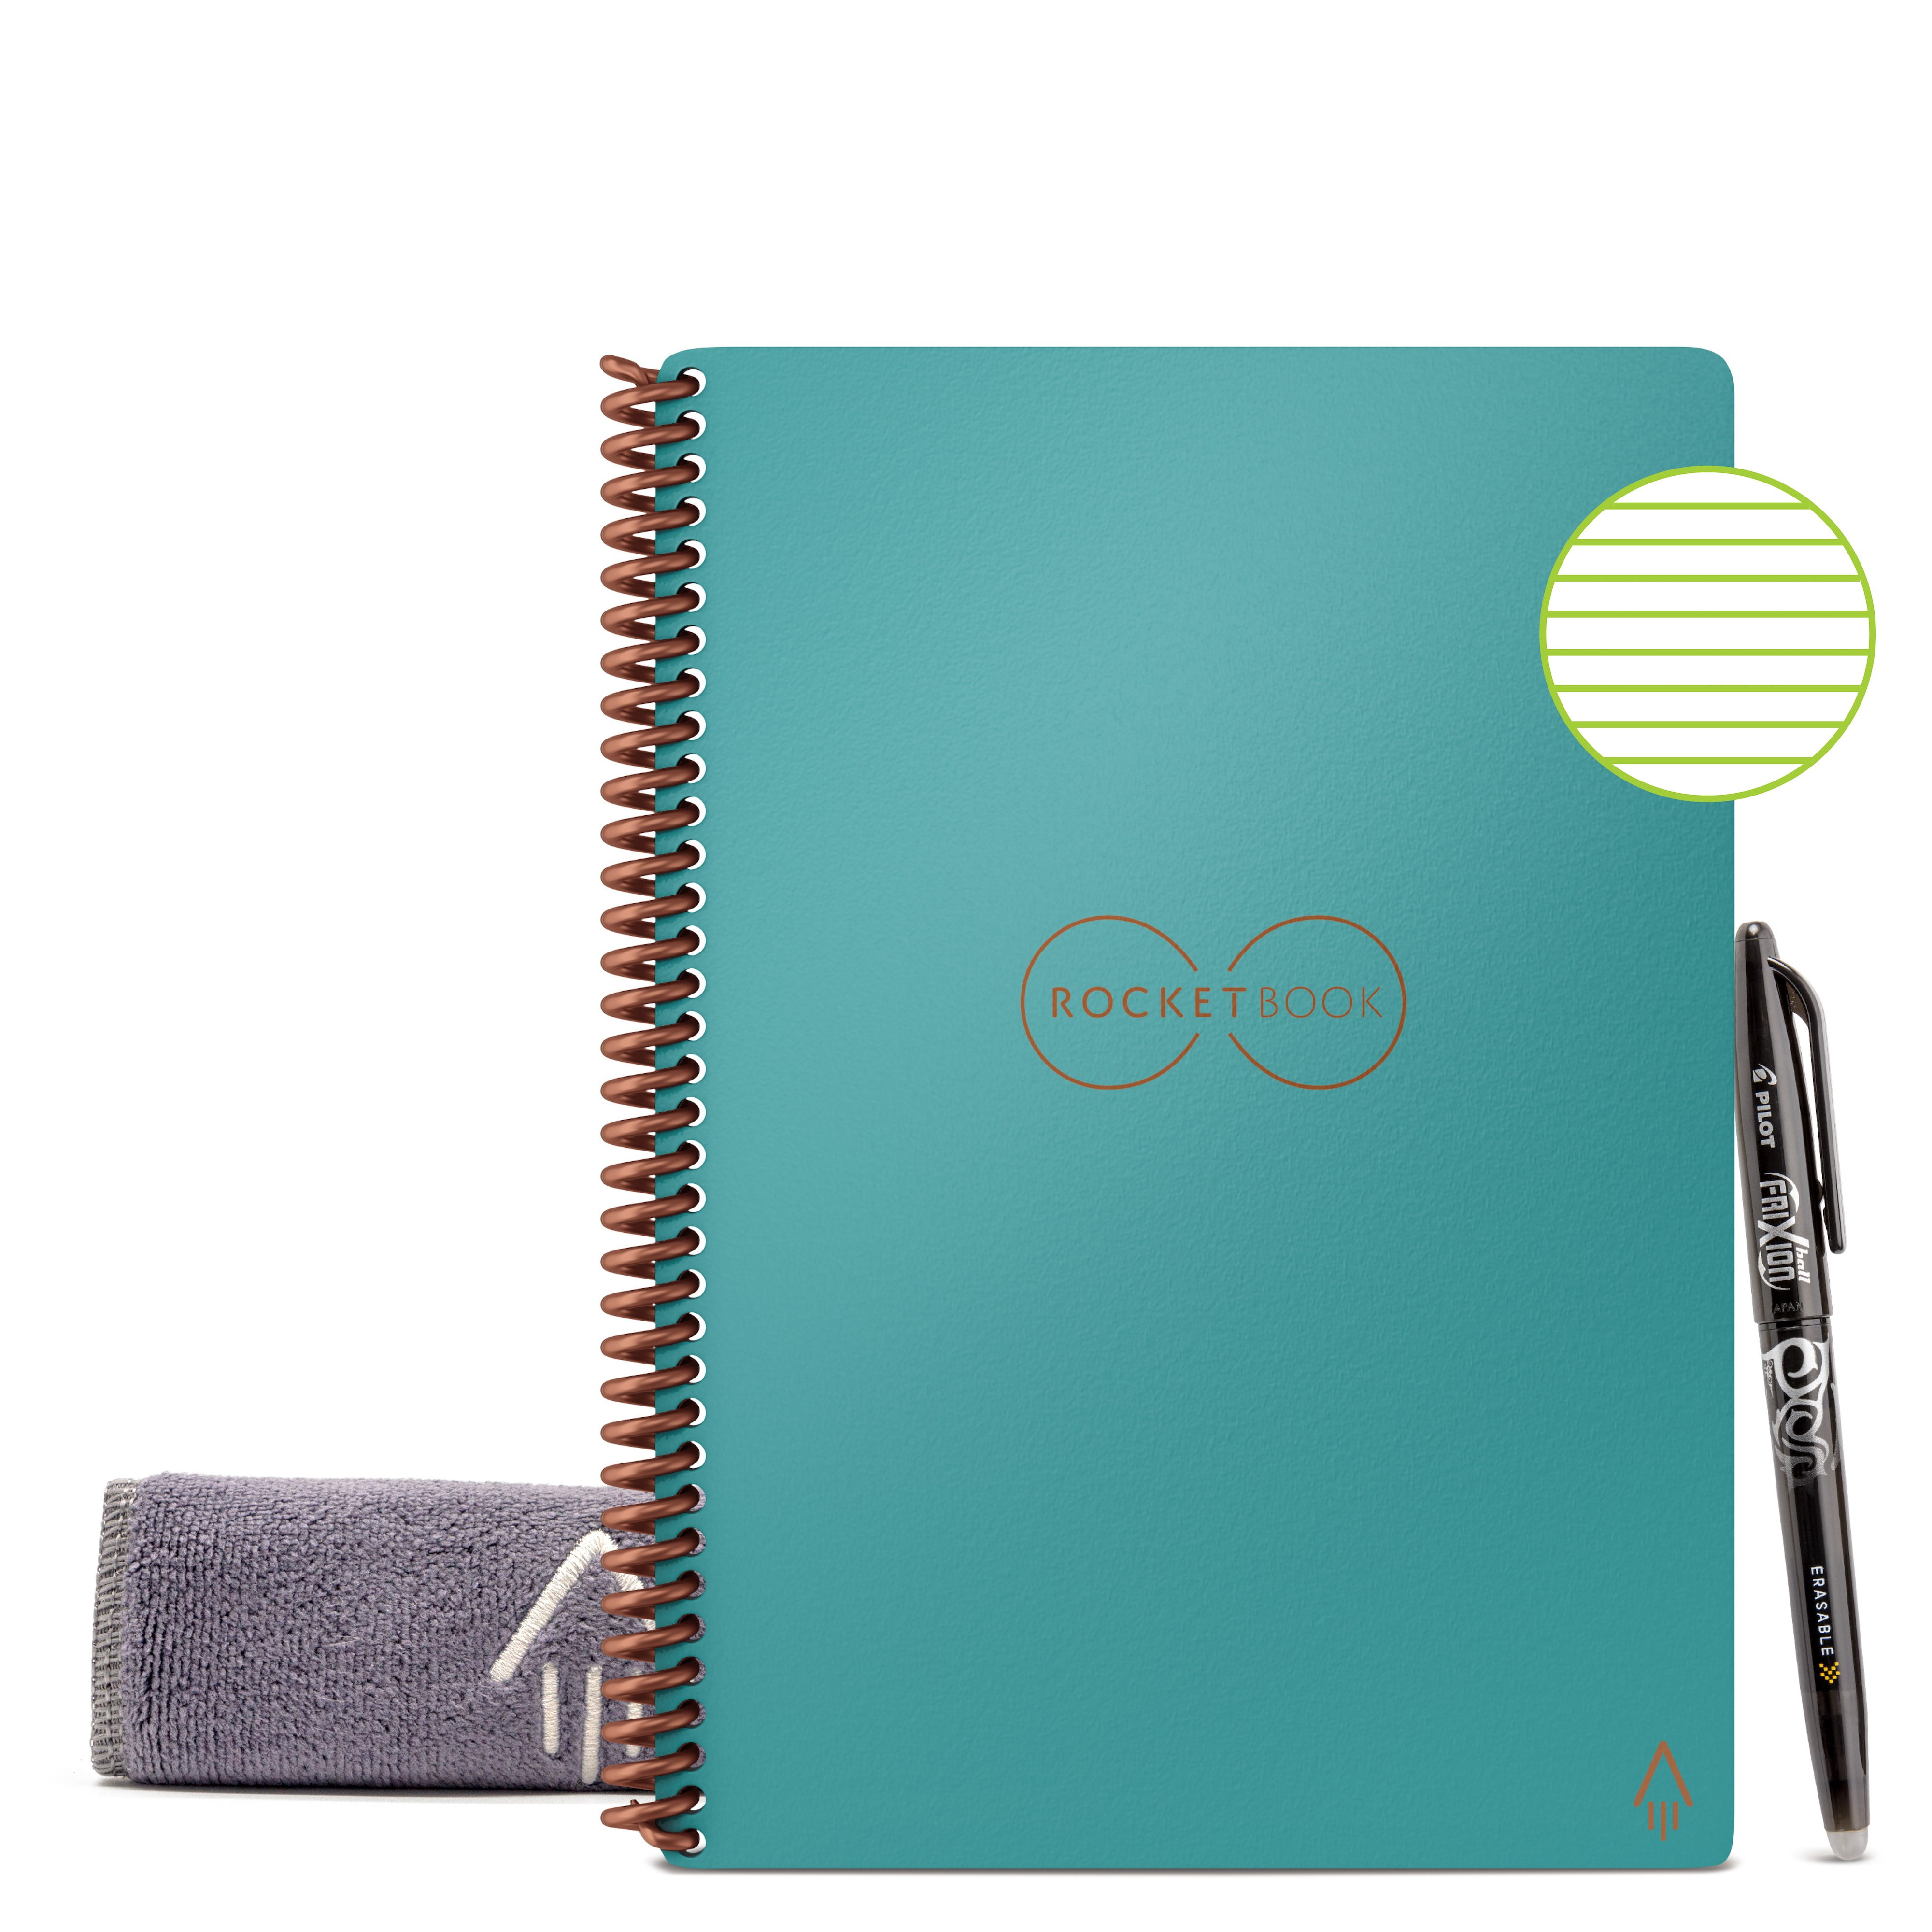 Rocketbook Core Smart Reusable Spiral Notebook, Blue, Executive Size  Eco-friendly Notebook (6 x 8.8), 36 Dot-Grid Pages, Includes 1 Pen and  Microfiber Cloth 